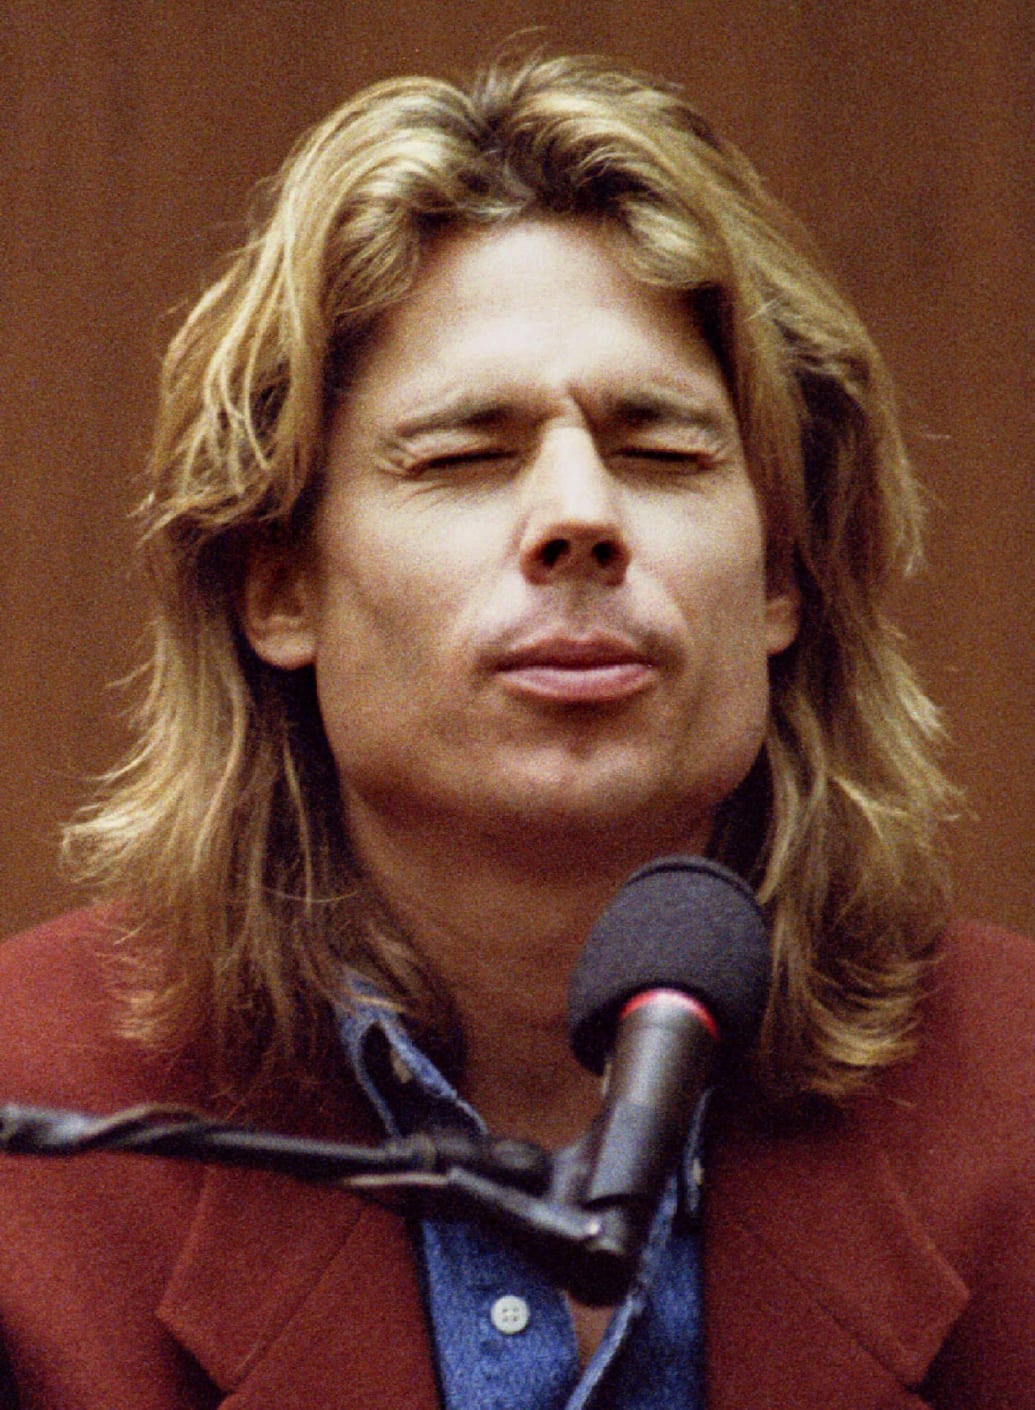 Brian ‘Kato’ Kaelin closes his eyes and grimaces as he thinks about his answer during cross examination in the O.J. Simpson trial.